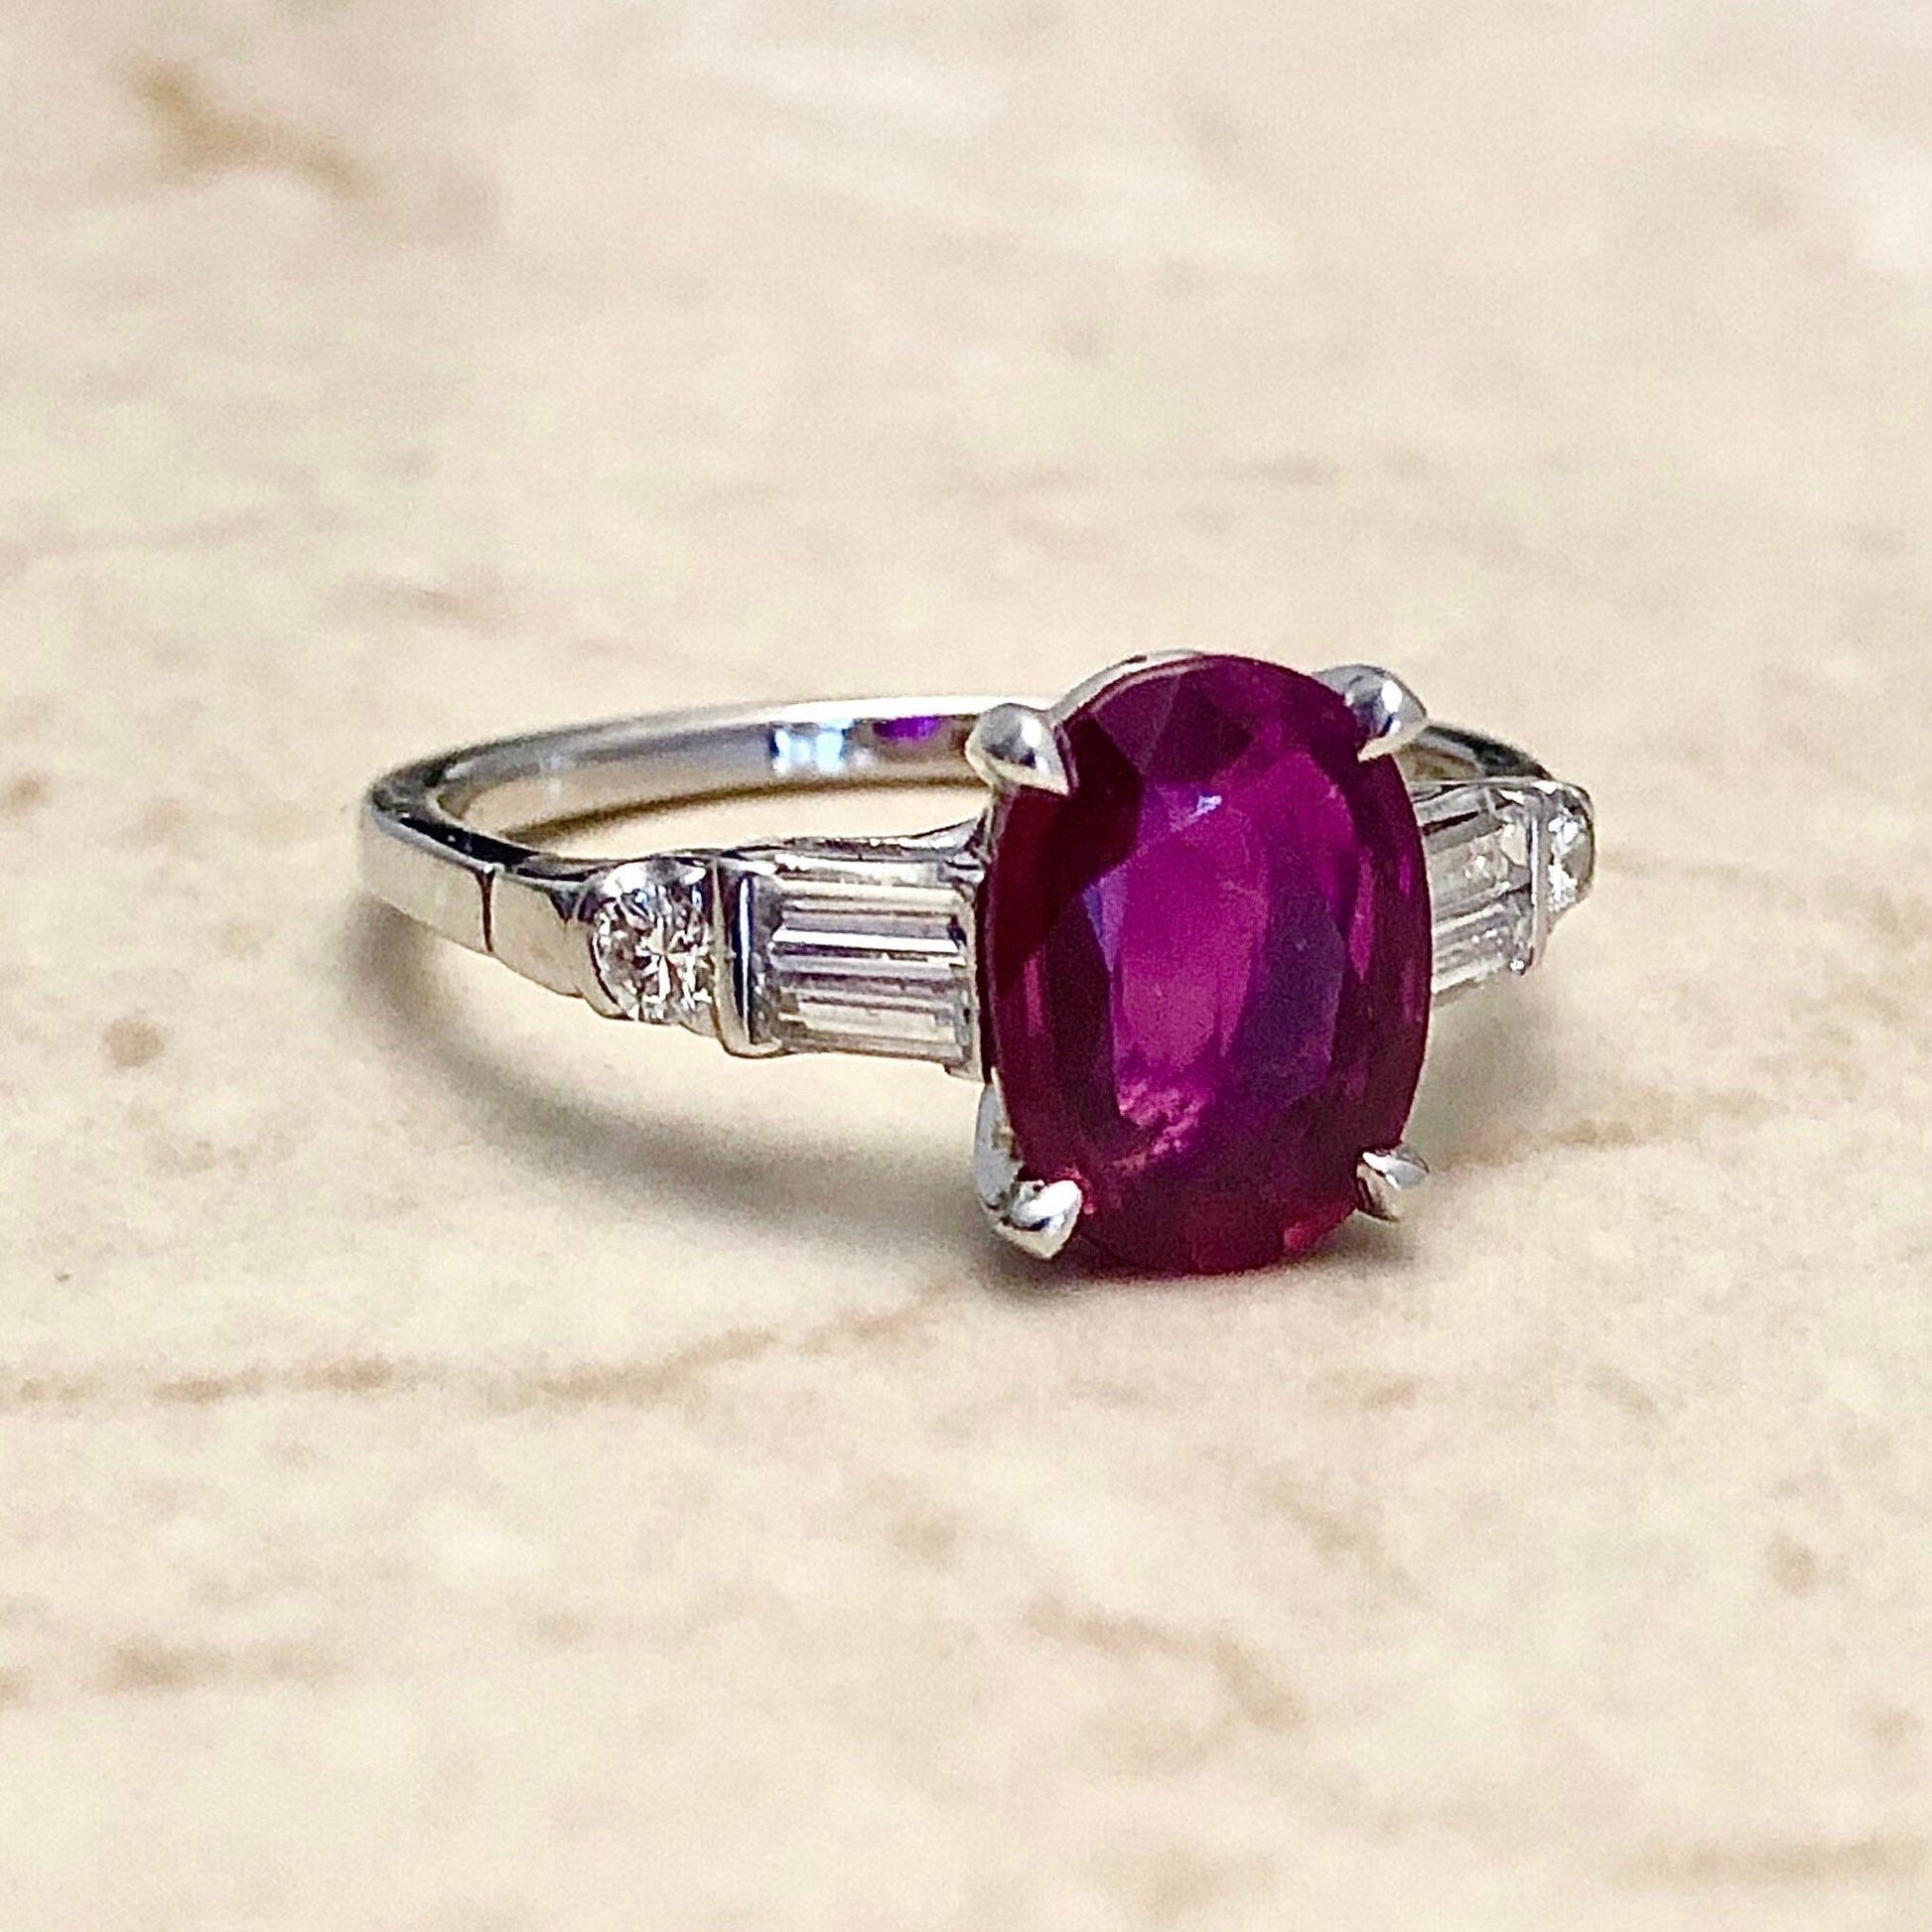 Vintage Handcrafted Platinum Ruby & Diamond Ring By Carvin French - Handmade Platinum Ring - July Birthstone Ring - Ruby Engagement Ring